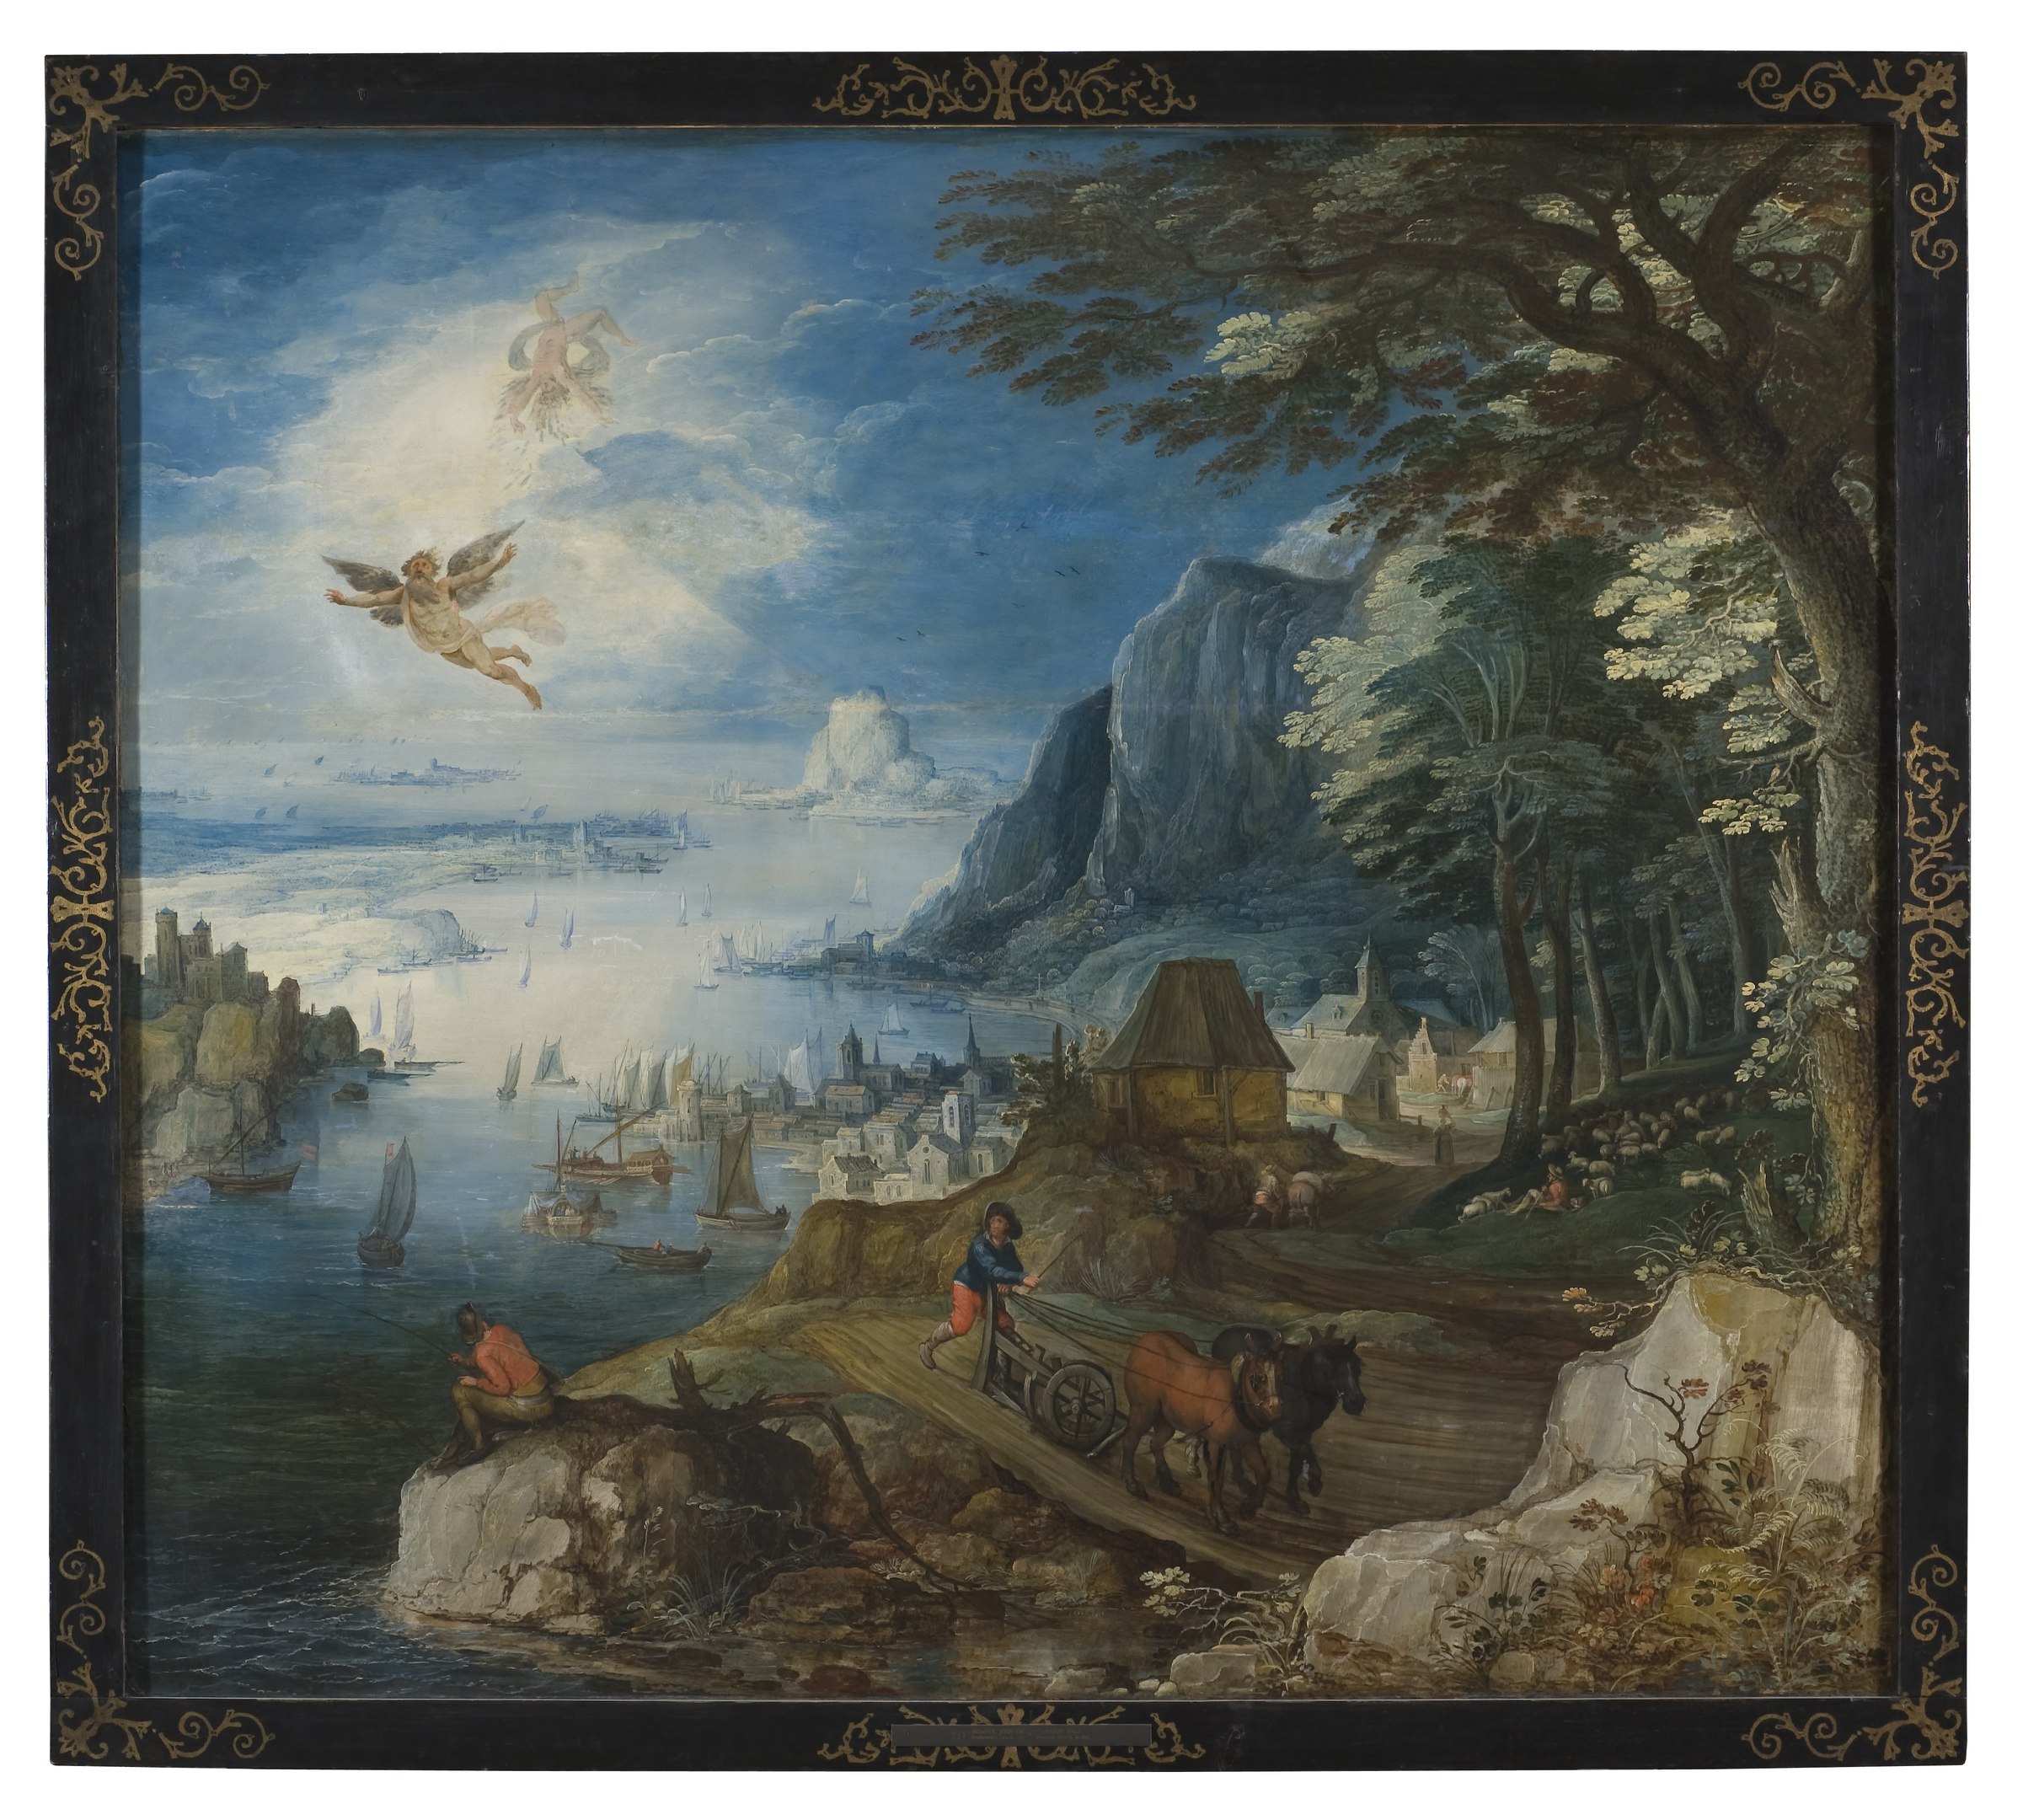 A landscape view of an angel falling from the sky near the sun as a fisherman, ploughman, and shepherd continue their day's work on the earth below